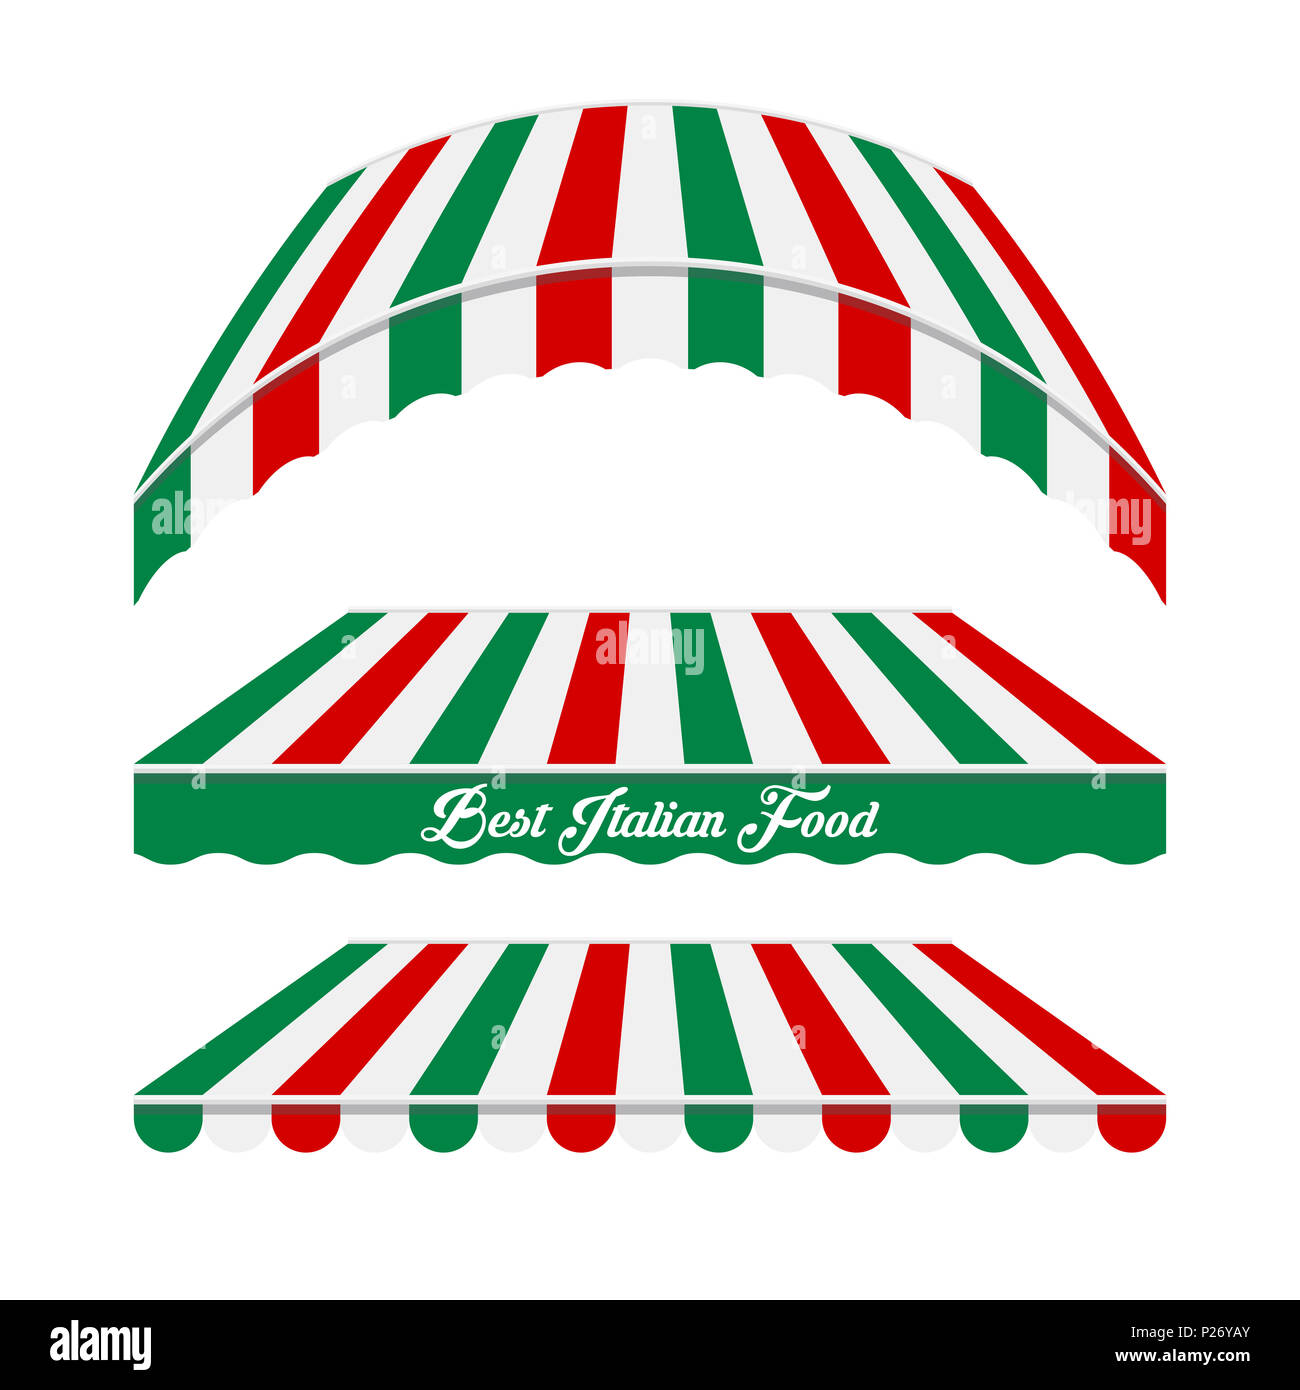 Awnings Set. Different Forms. Colors of the Italian Flag. Italian Cafe, Pizzeria, Market Store Design Elements. Stock Photo